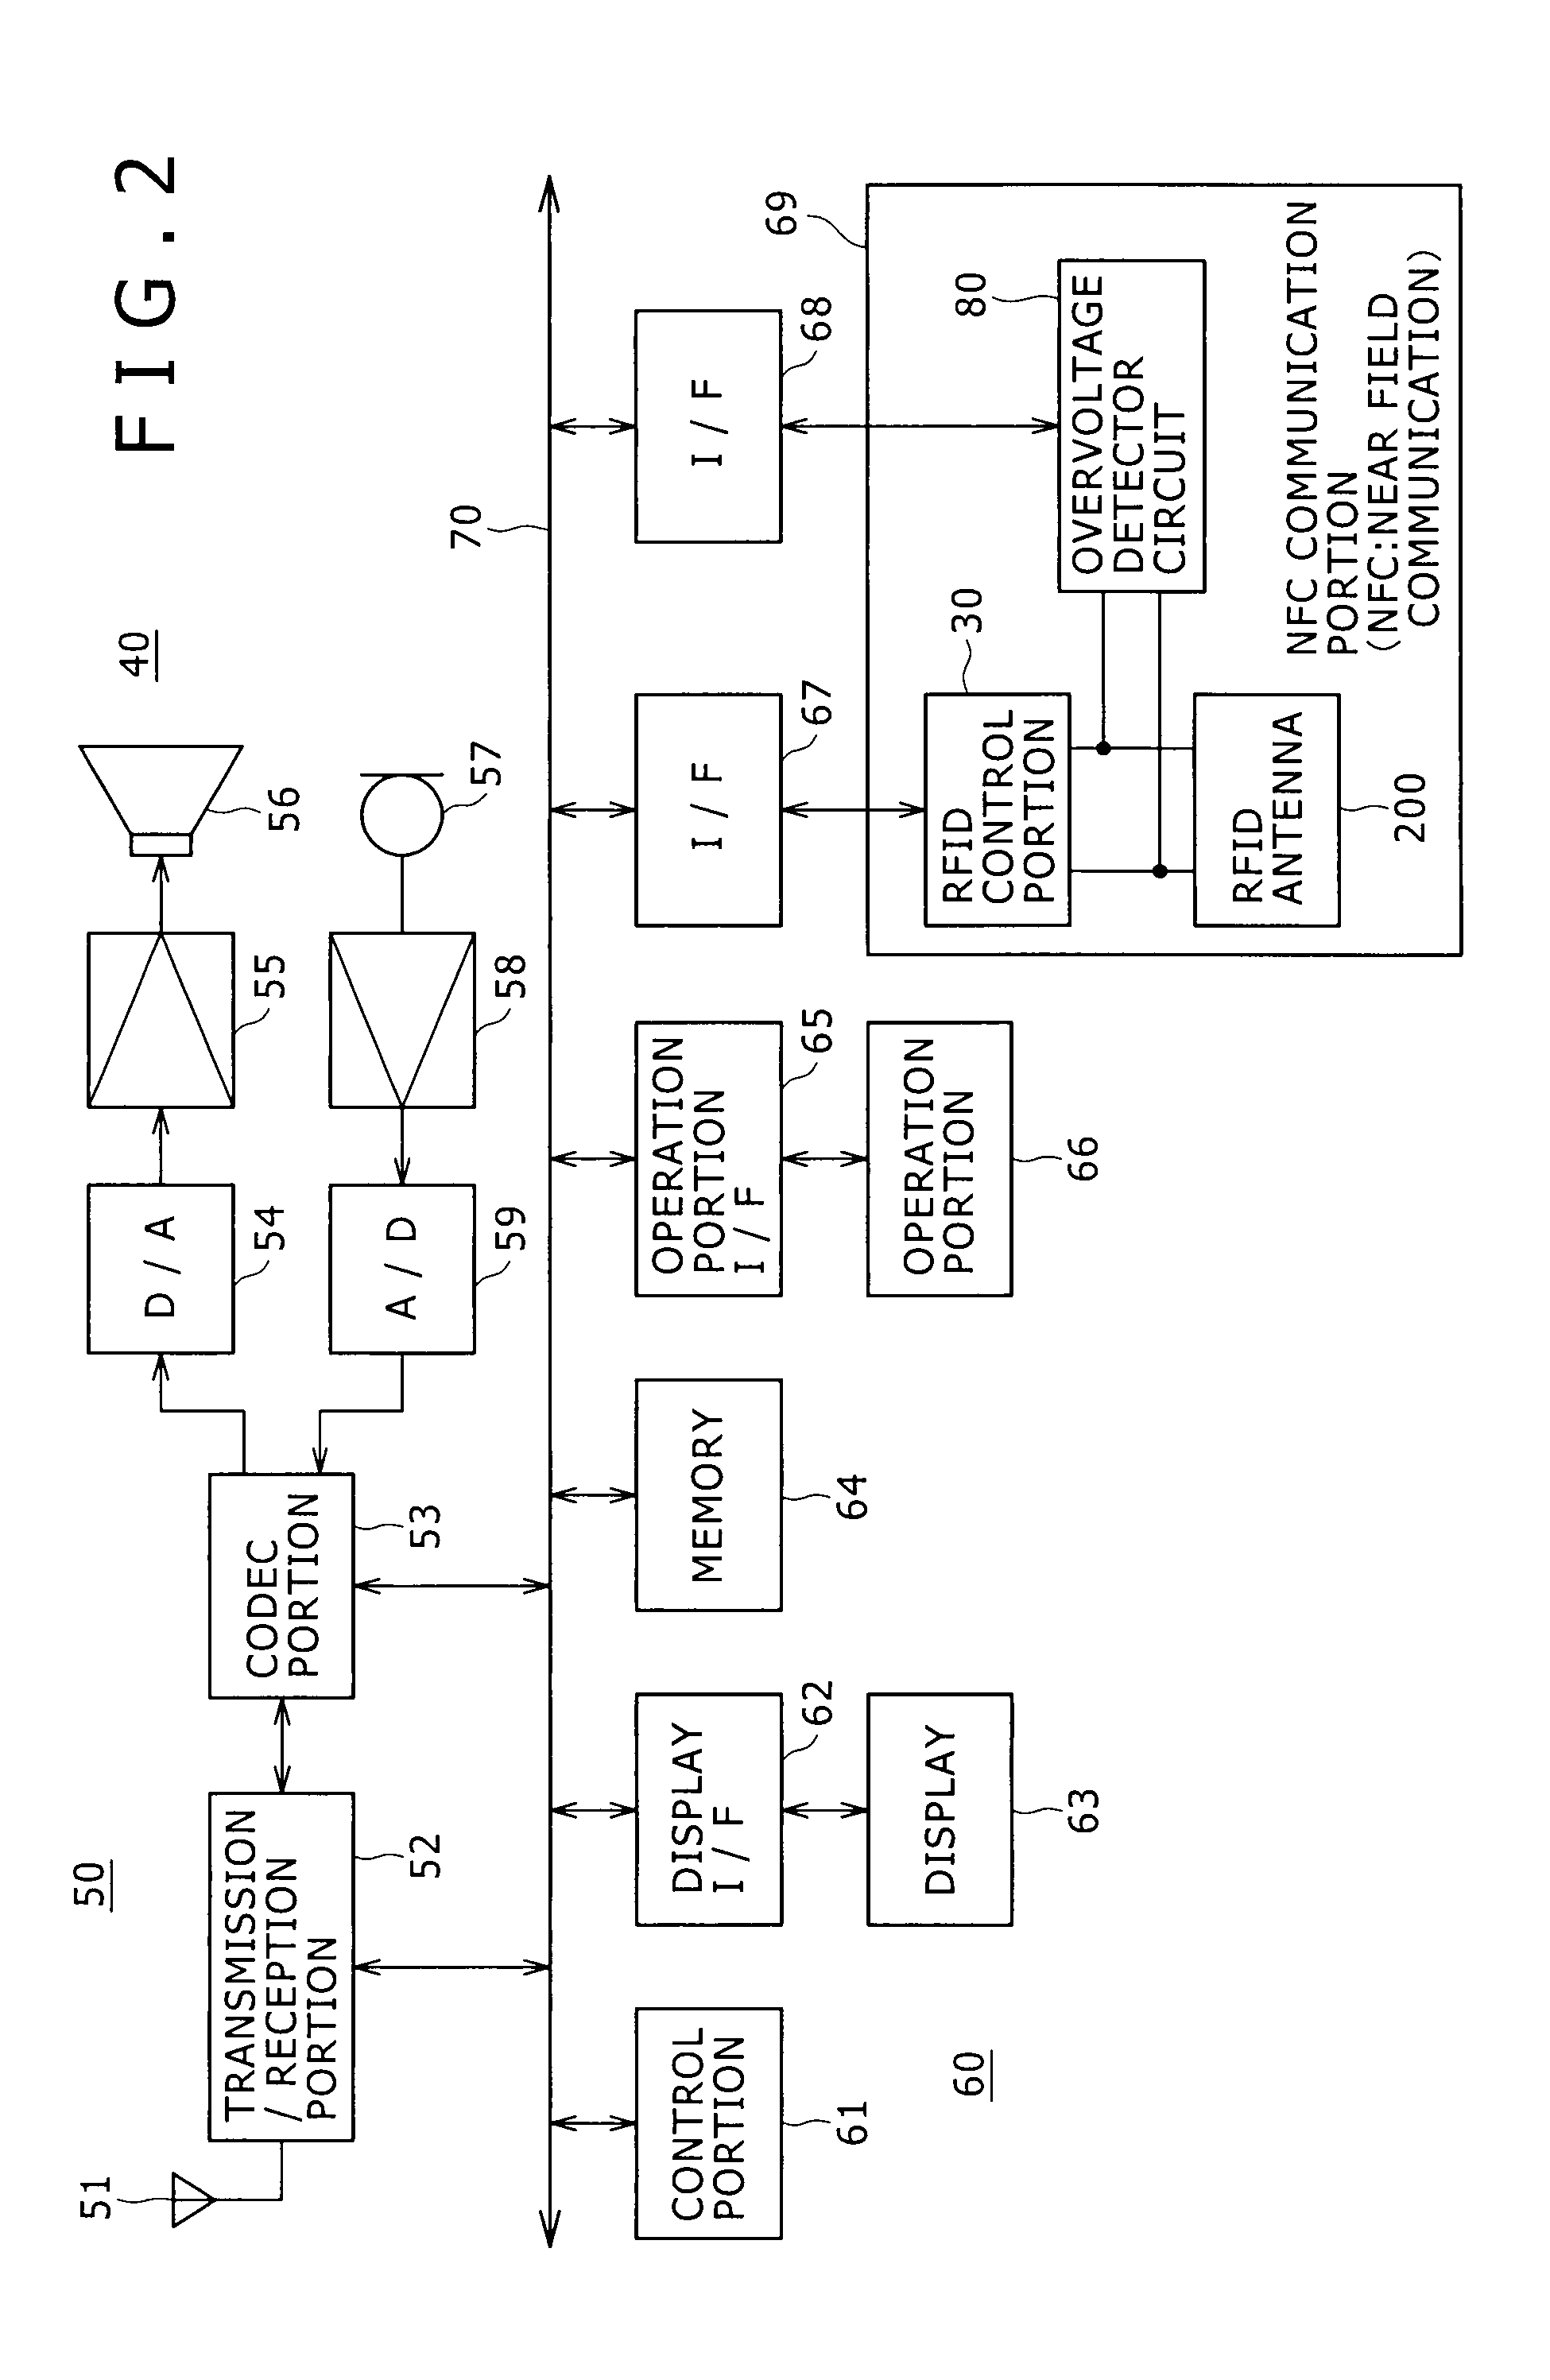 Near field communication antenna and mobile device